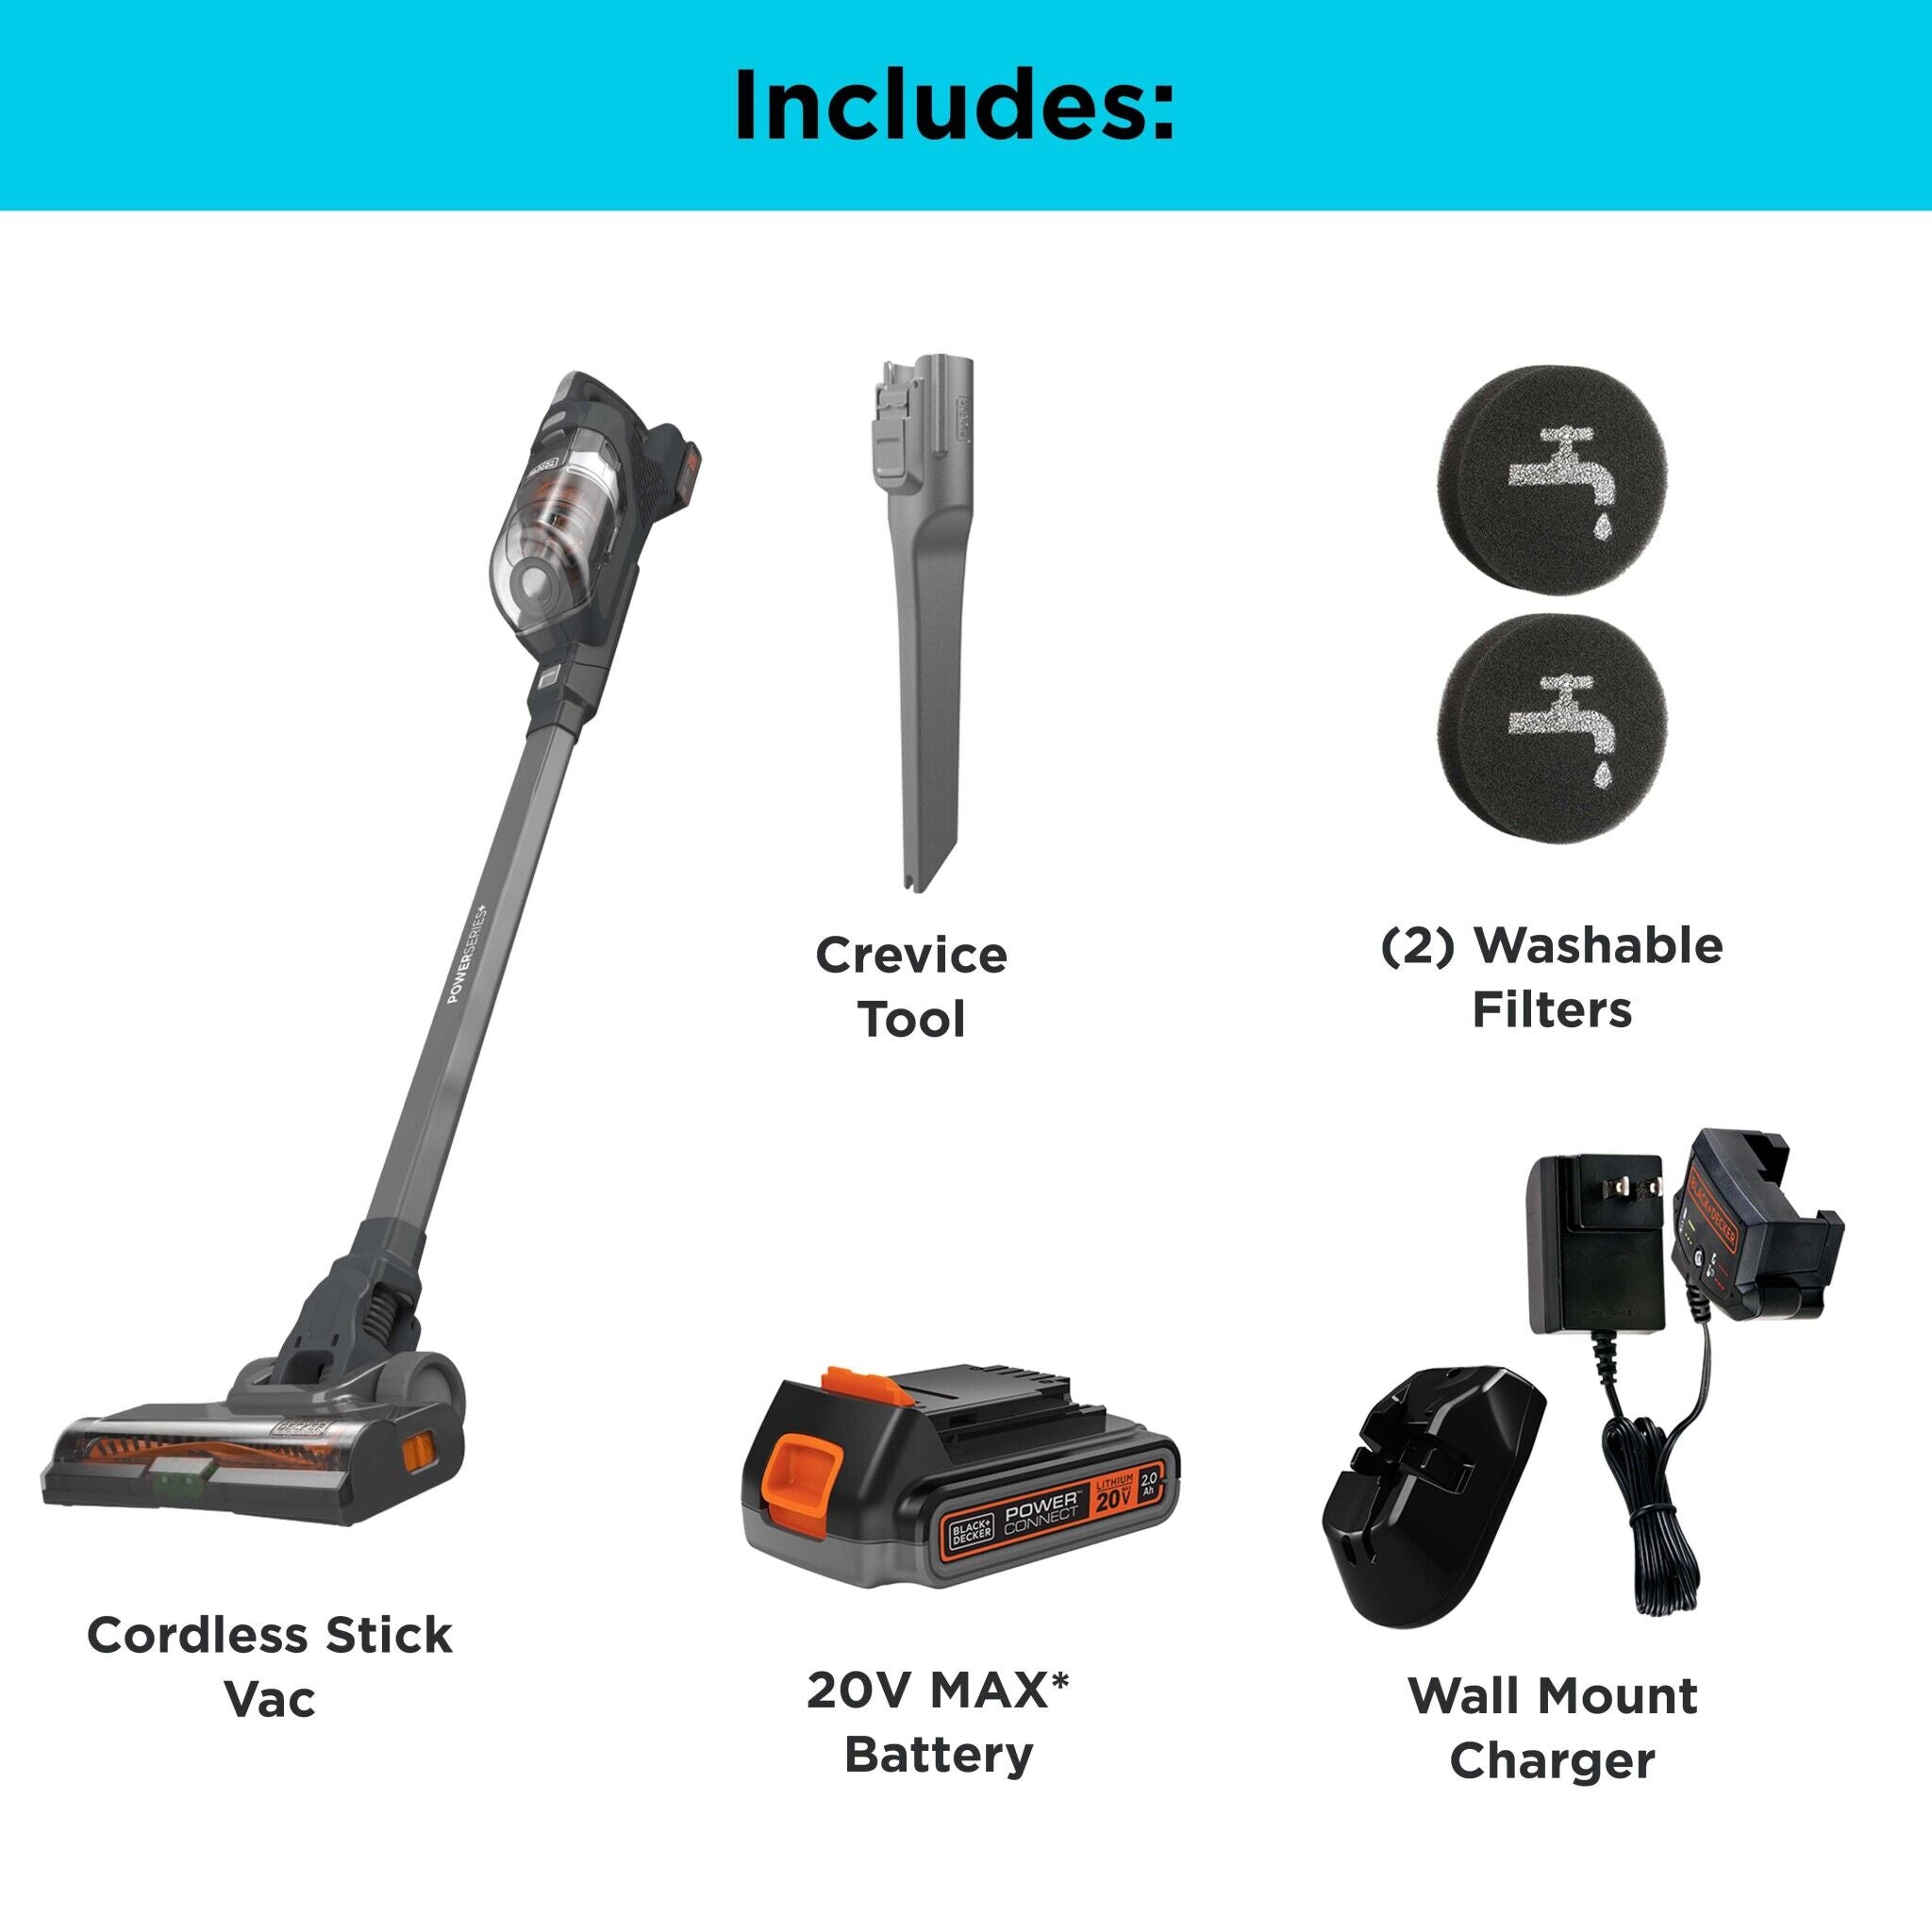 Accessories included with the POWERSERIES+ Cordless stick vac; two washable filters, one 20V MAX* battery, wall mount charger, and crevice tool.